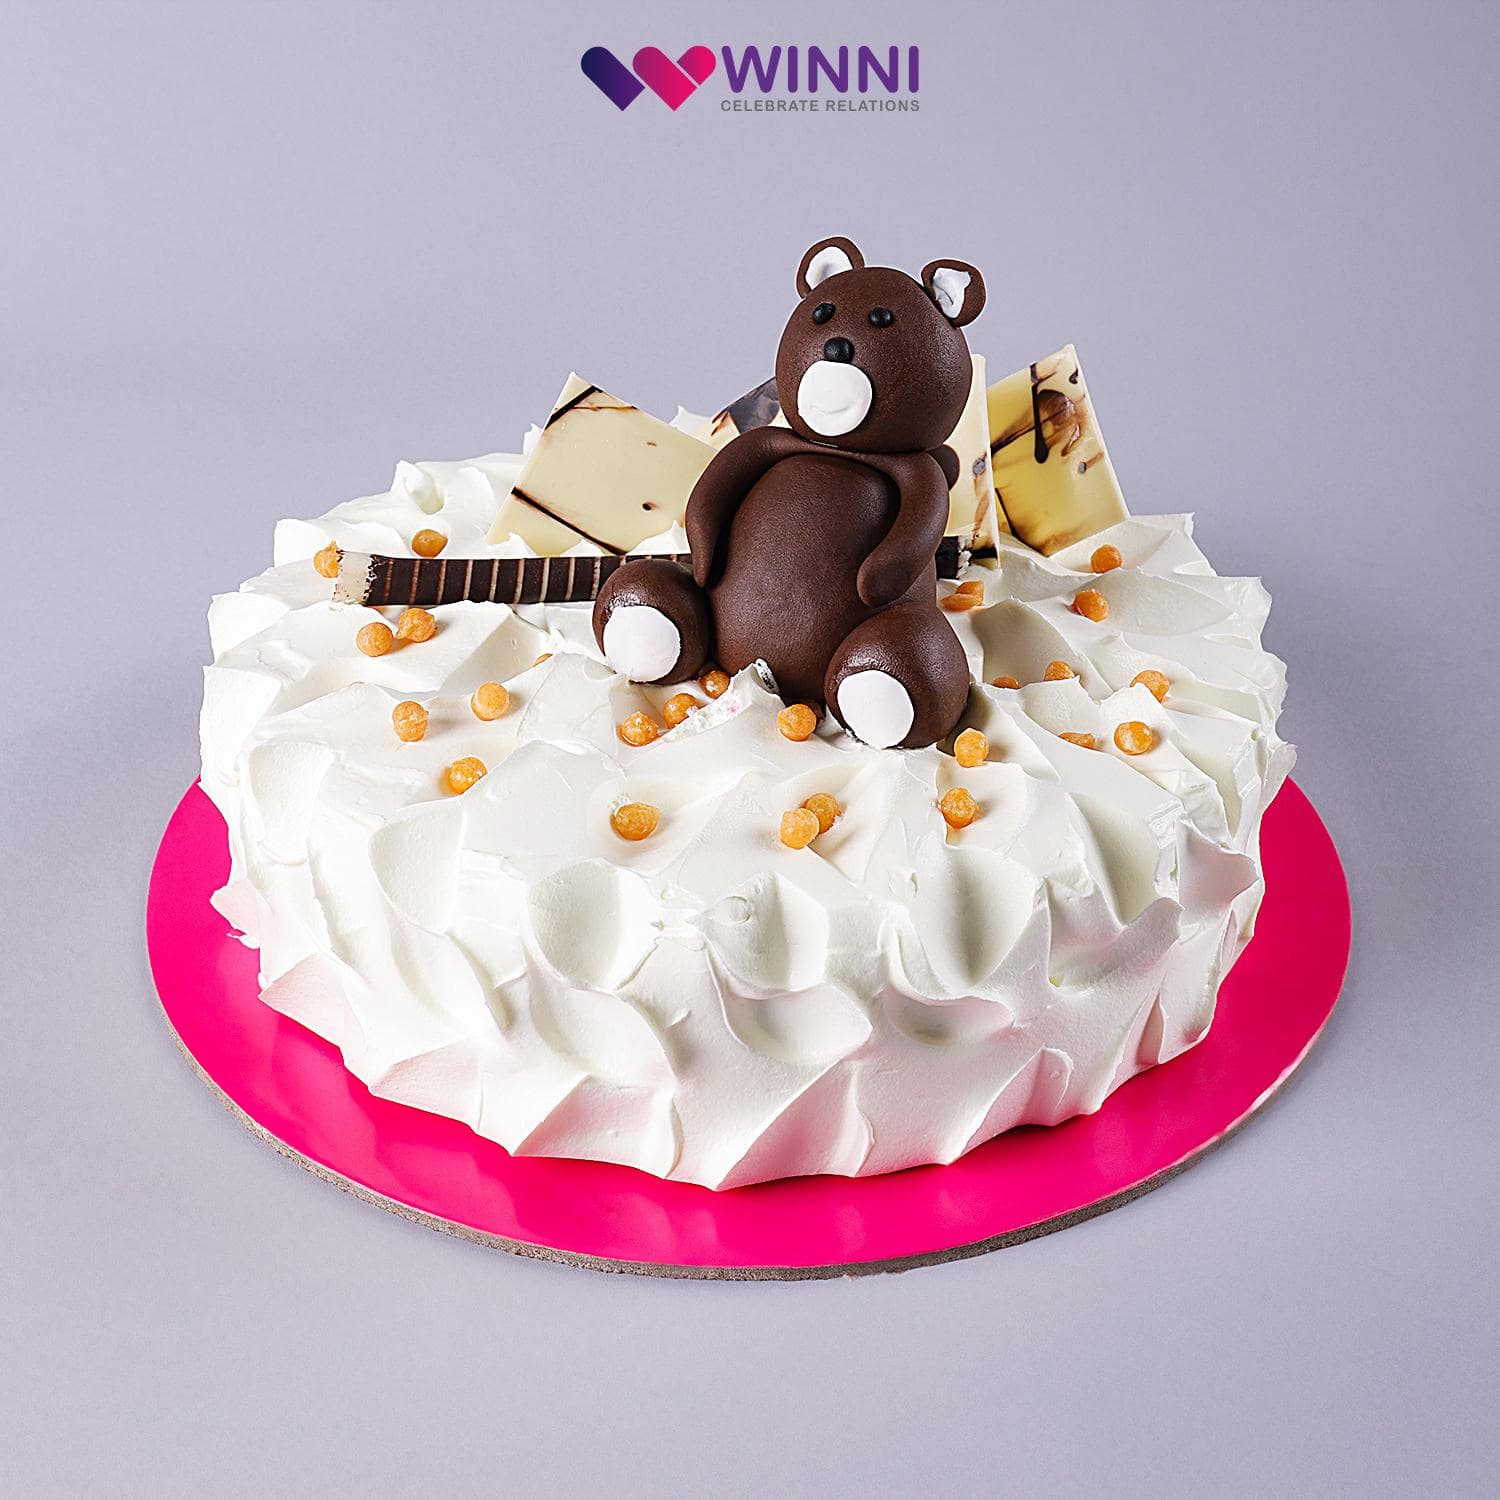 Trendiest Cakes Of 2022 Are Here! - Winni - Celebrate Relations